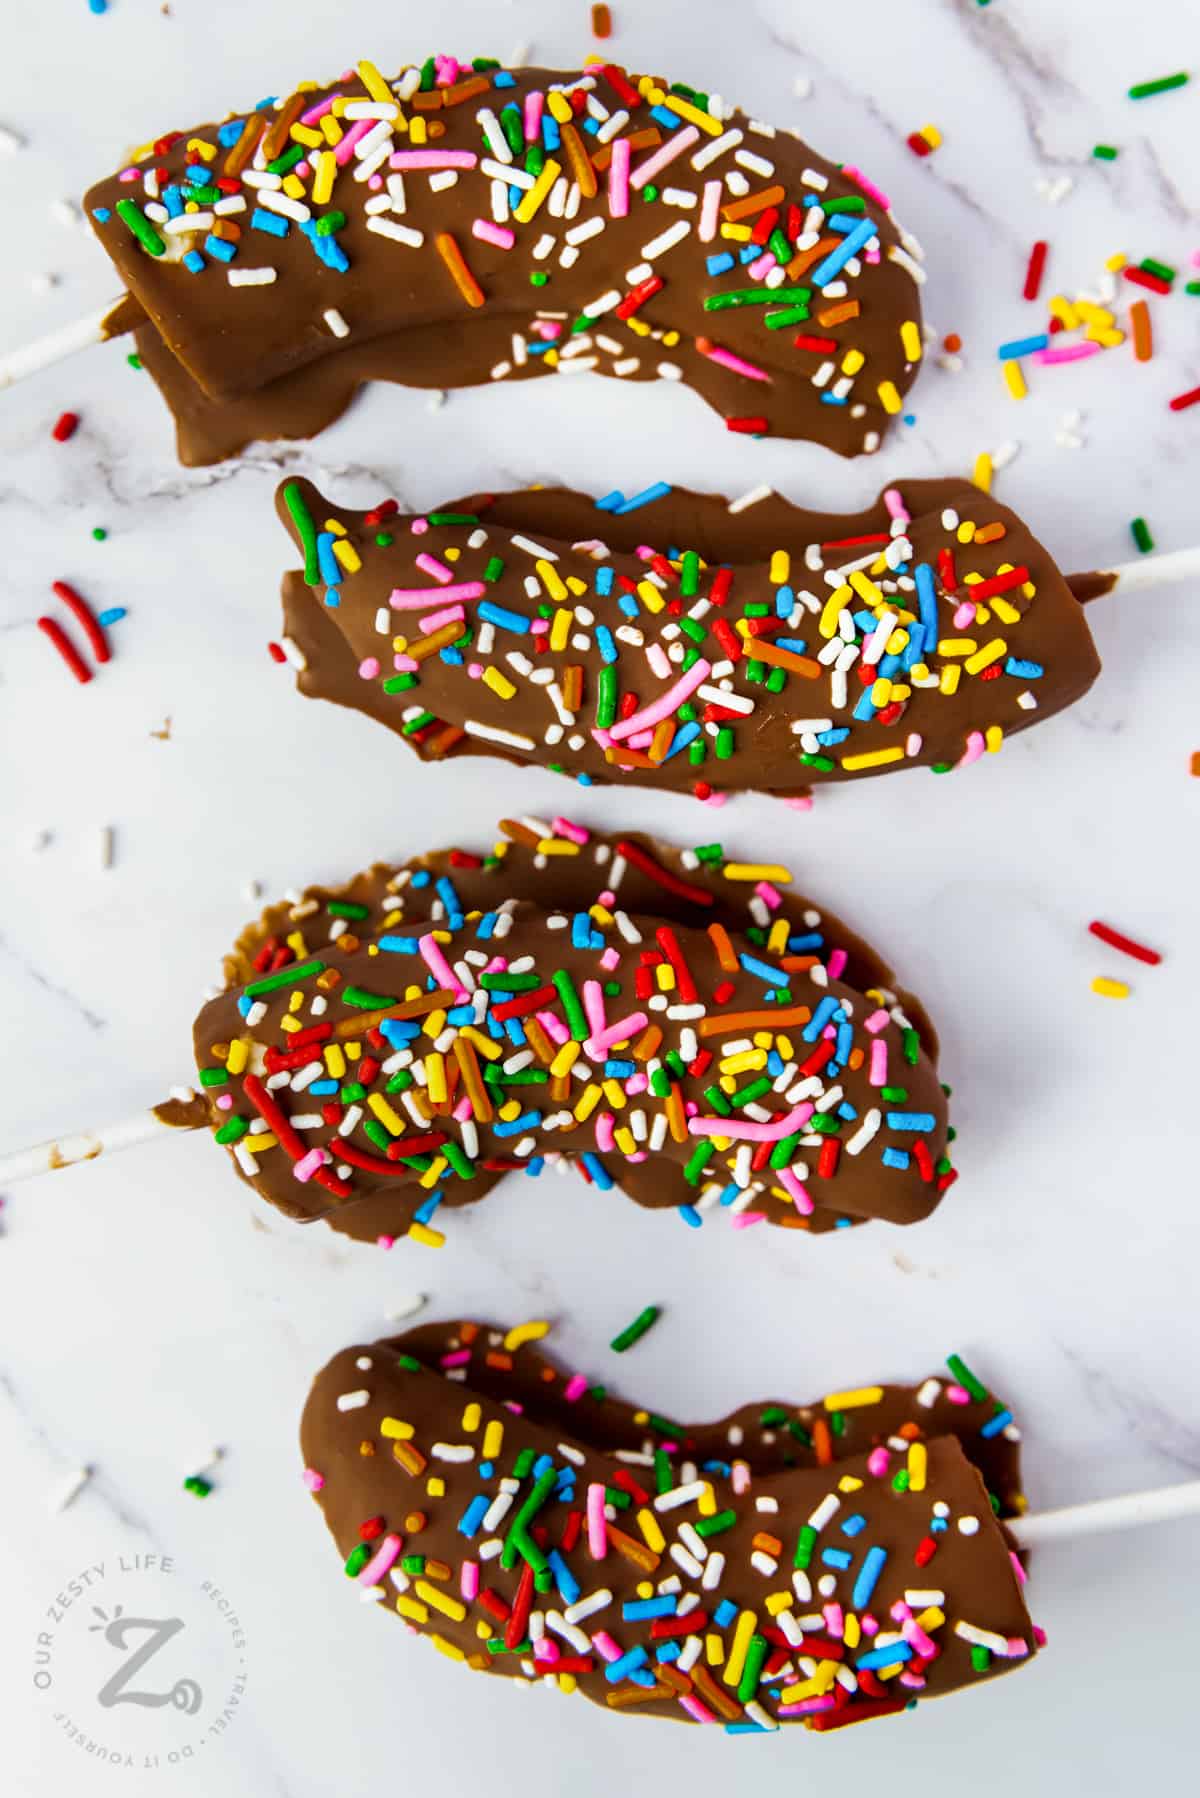 Chocolate Dipped Bananas with sprinkles